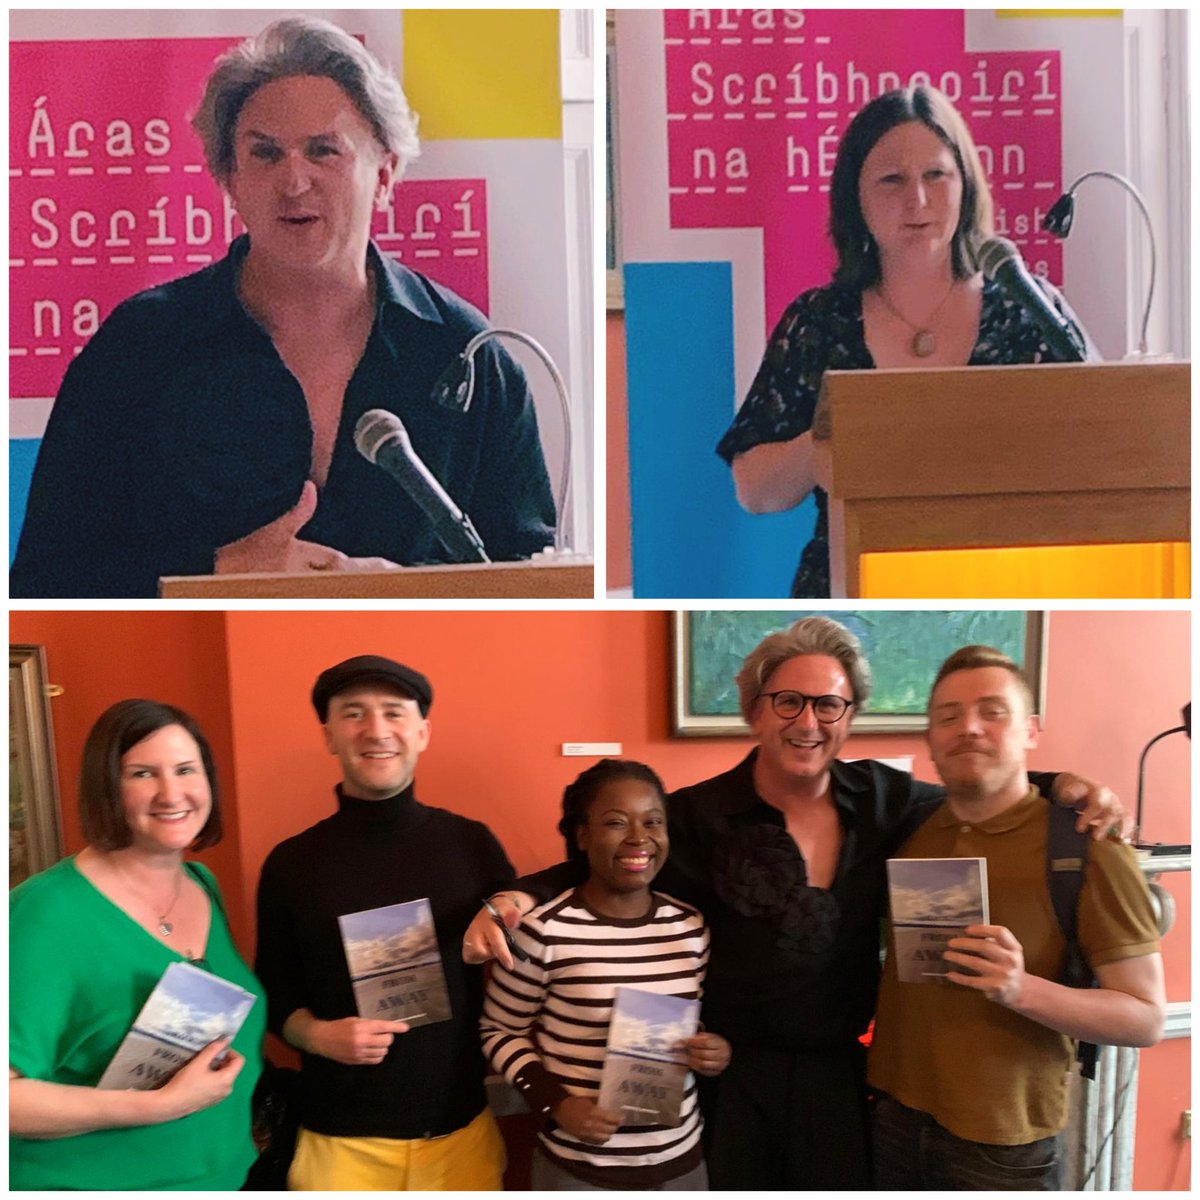 Lovely evening in the @IrishWritersCtr for the launch of new collections by @deuxiemepeau and Emma McKervey. Always lovely to see poet pals and support new work. Thanks to @SonyaGildea for the photos!